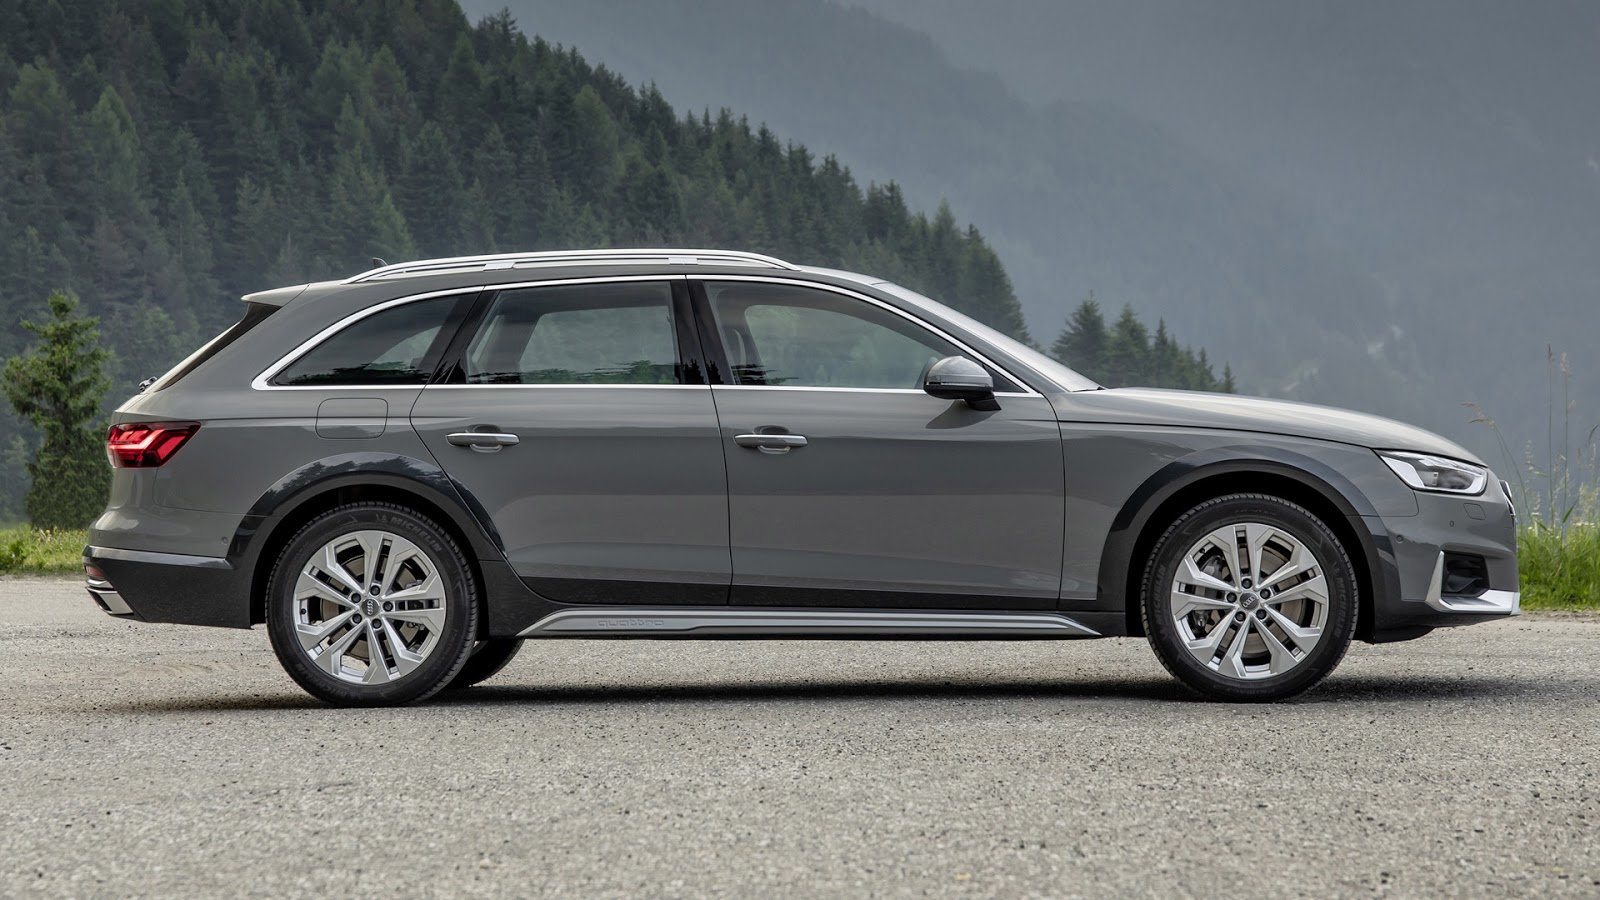 2020 Audi A4 Allroad Review, Specs, Price - Carshighlight.com